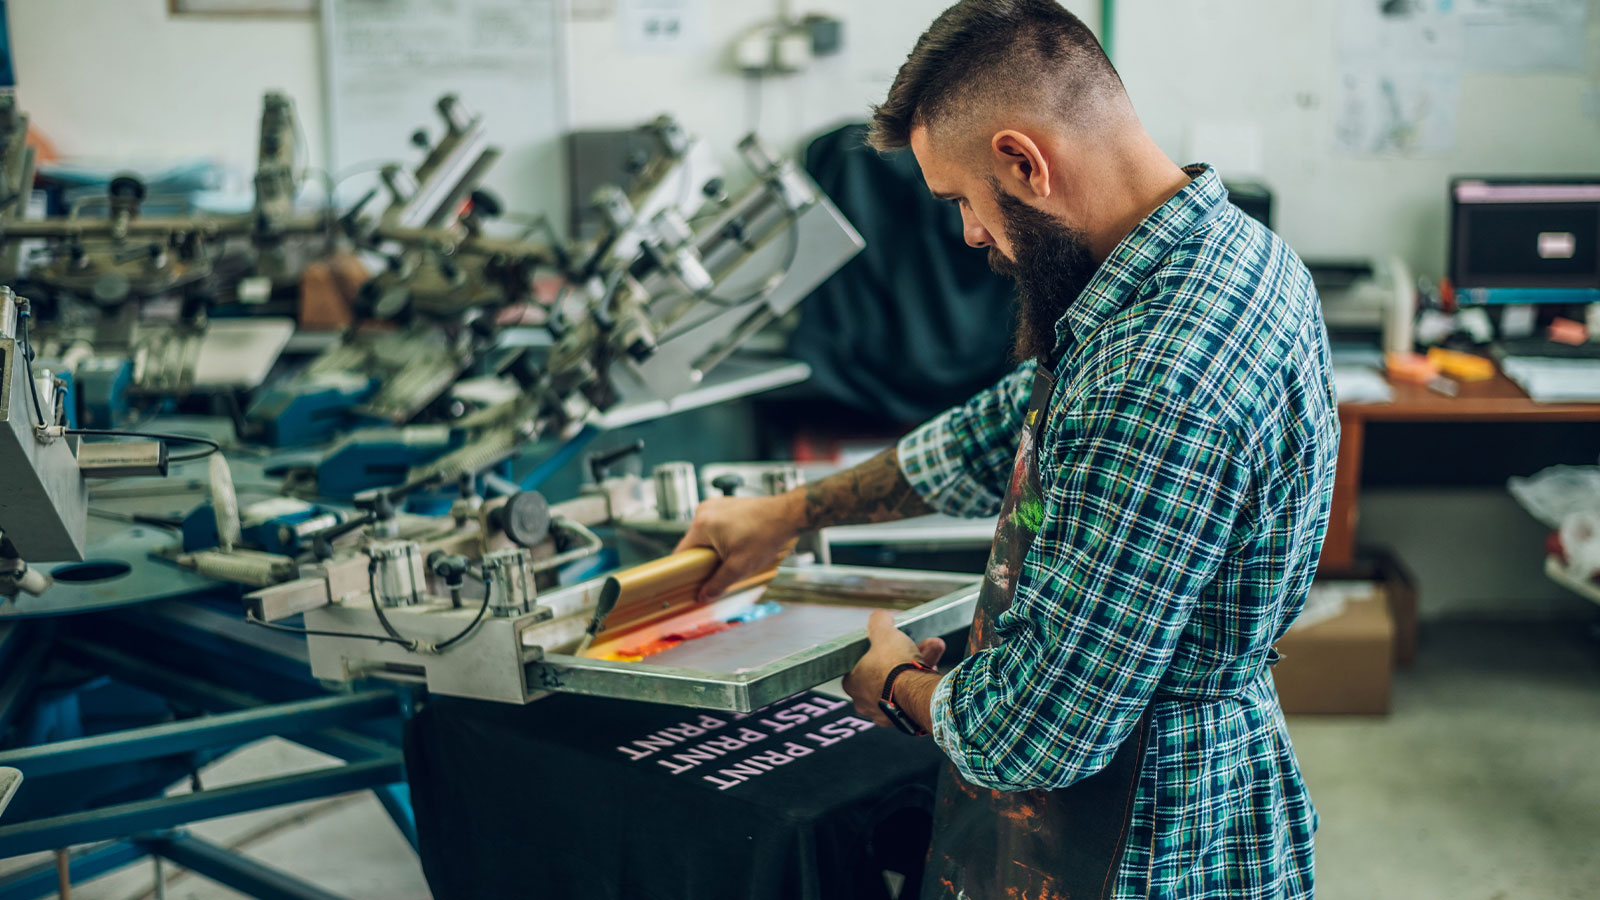 Screen Printing Services Worcester, MA | Custom Apparel | Screen Printed Shirts, Hats, Hoodies, & More Near Worcester